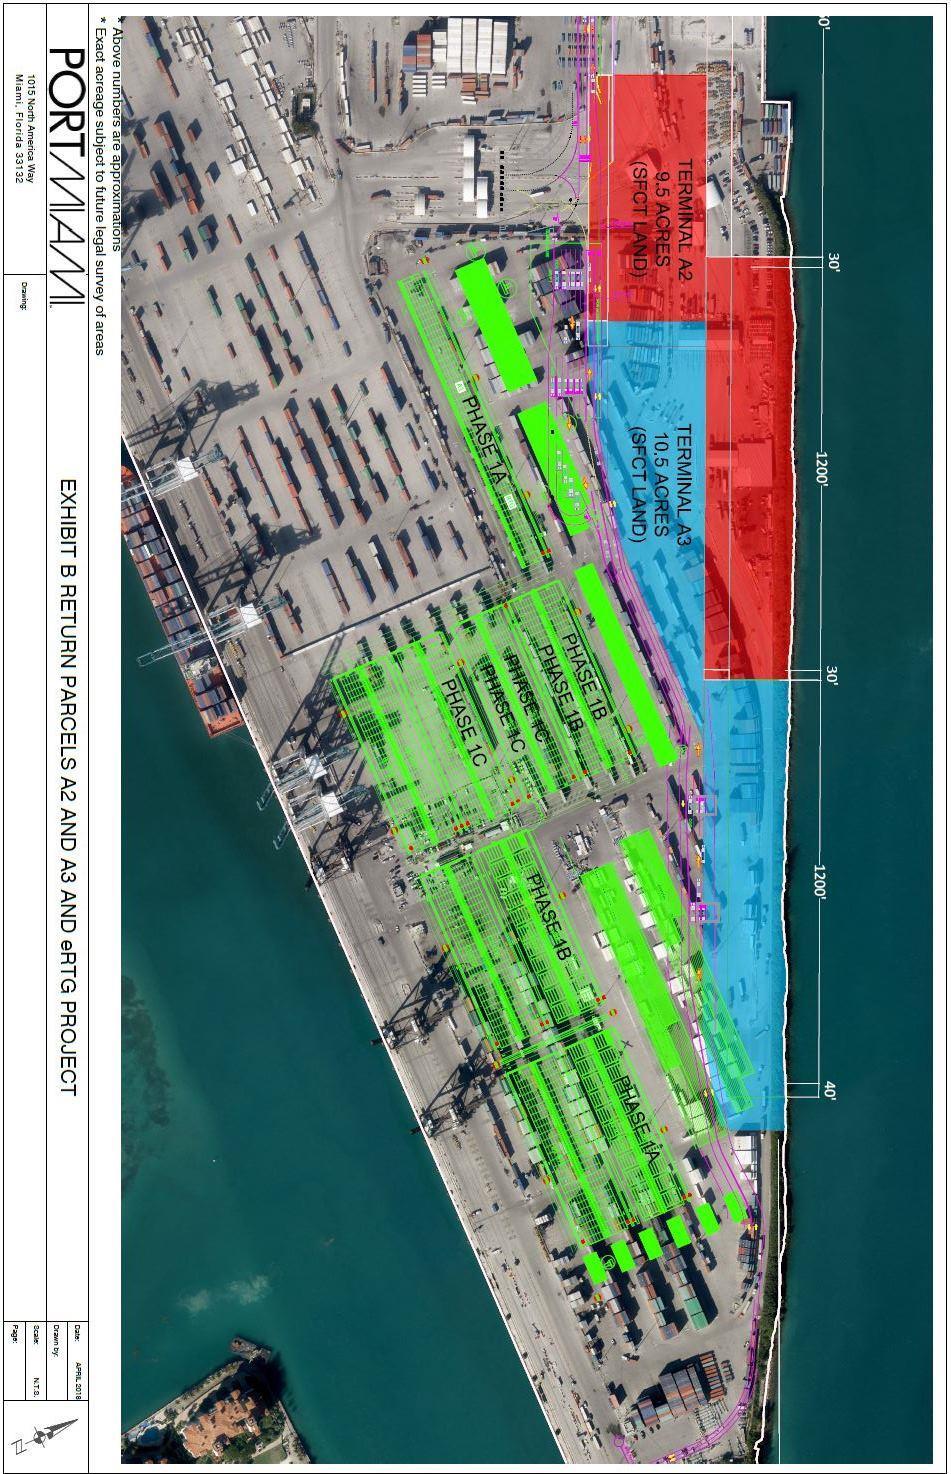 First Phases of Cargo Yard Densification Conversion to